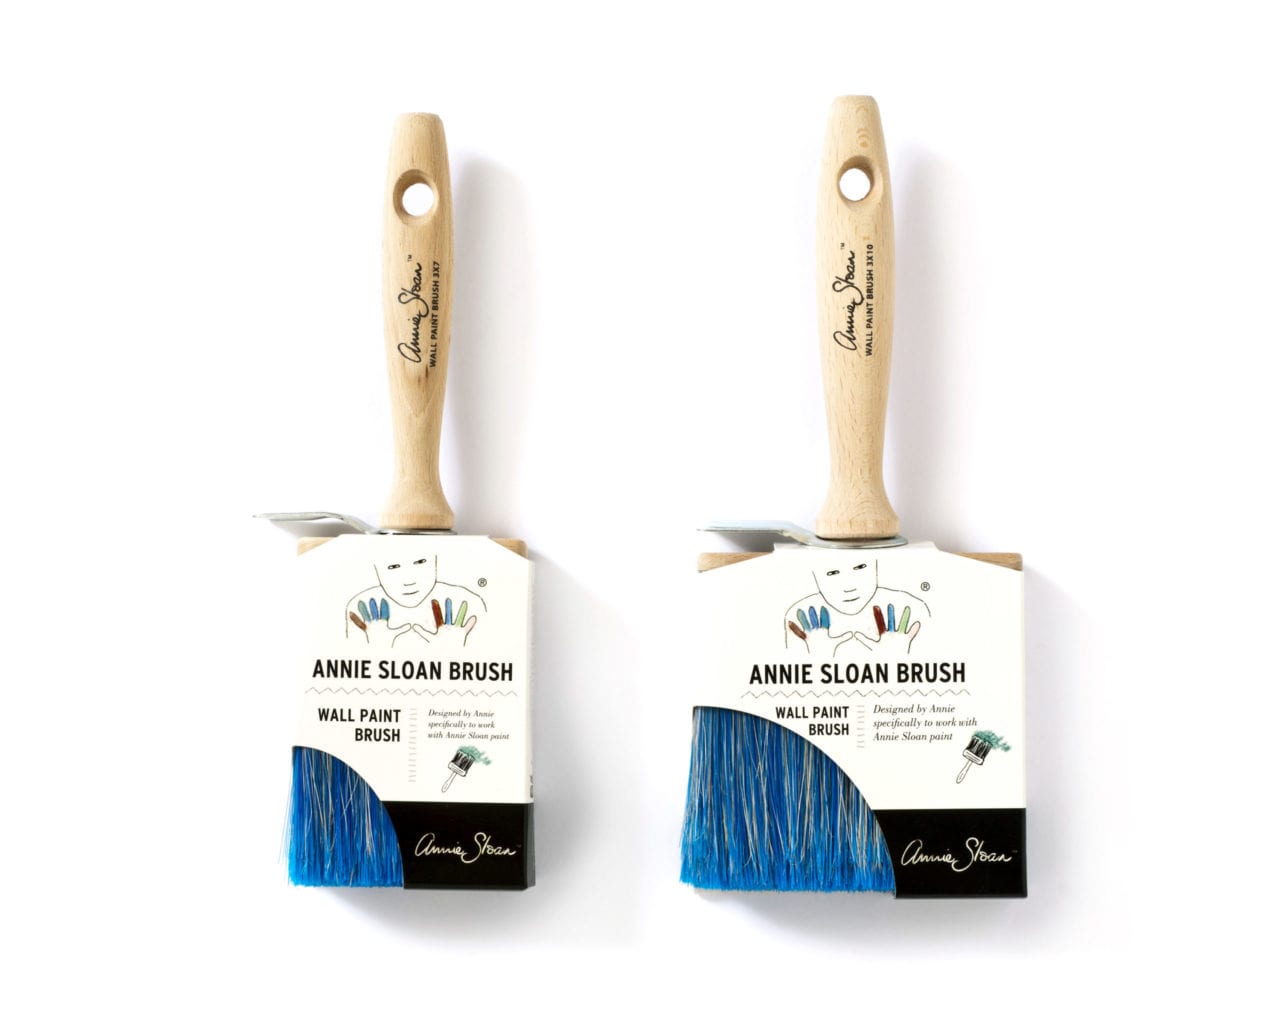 Annie Sloan Small and Large Wall Paint Brushes in packaging